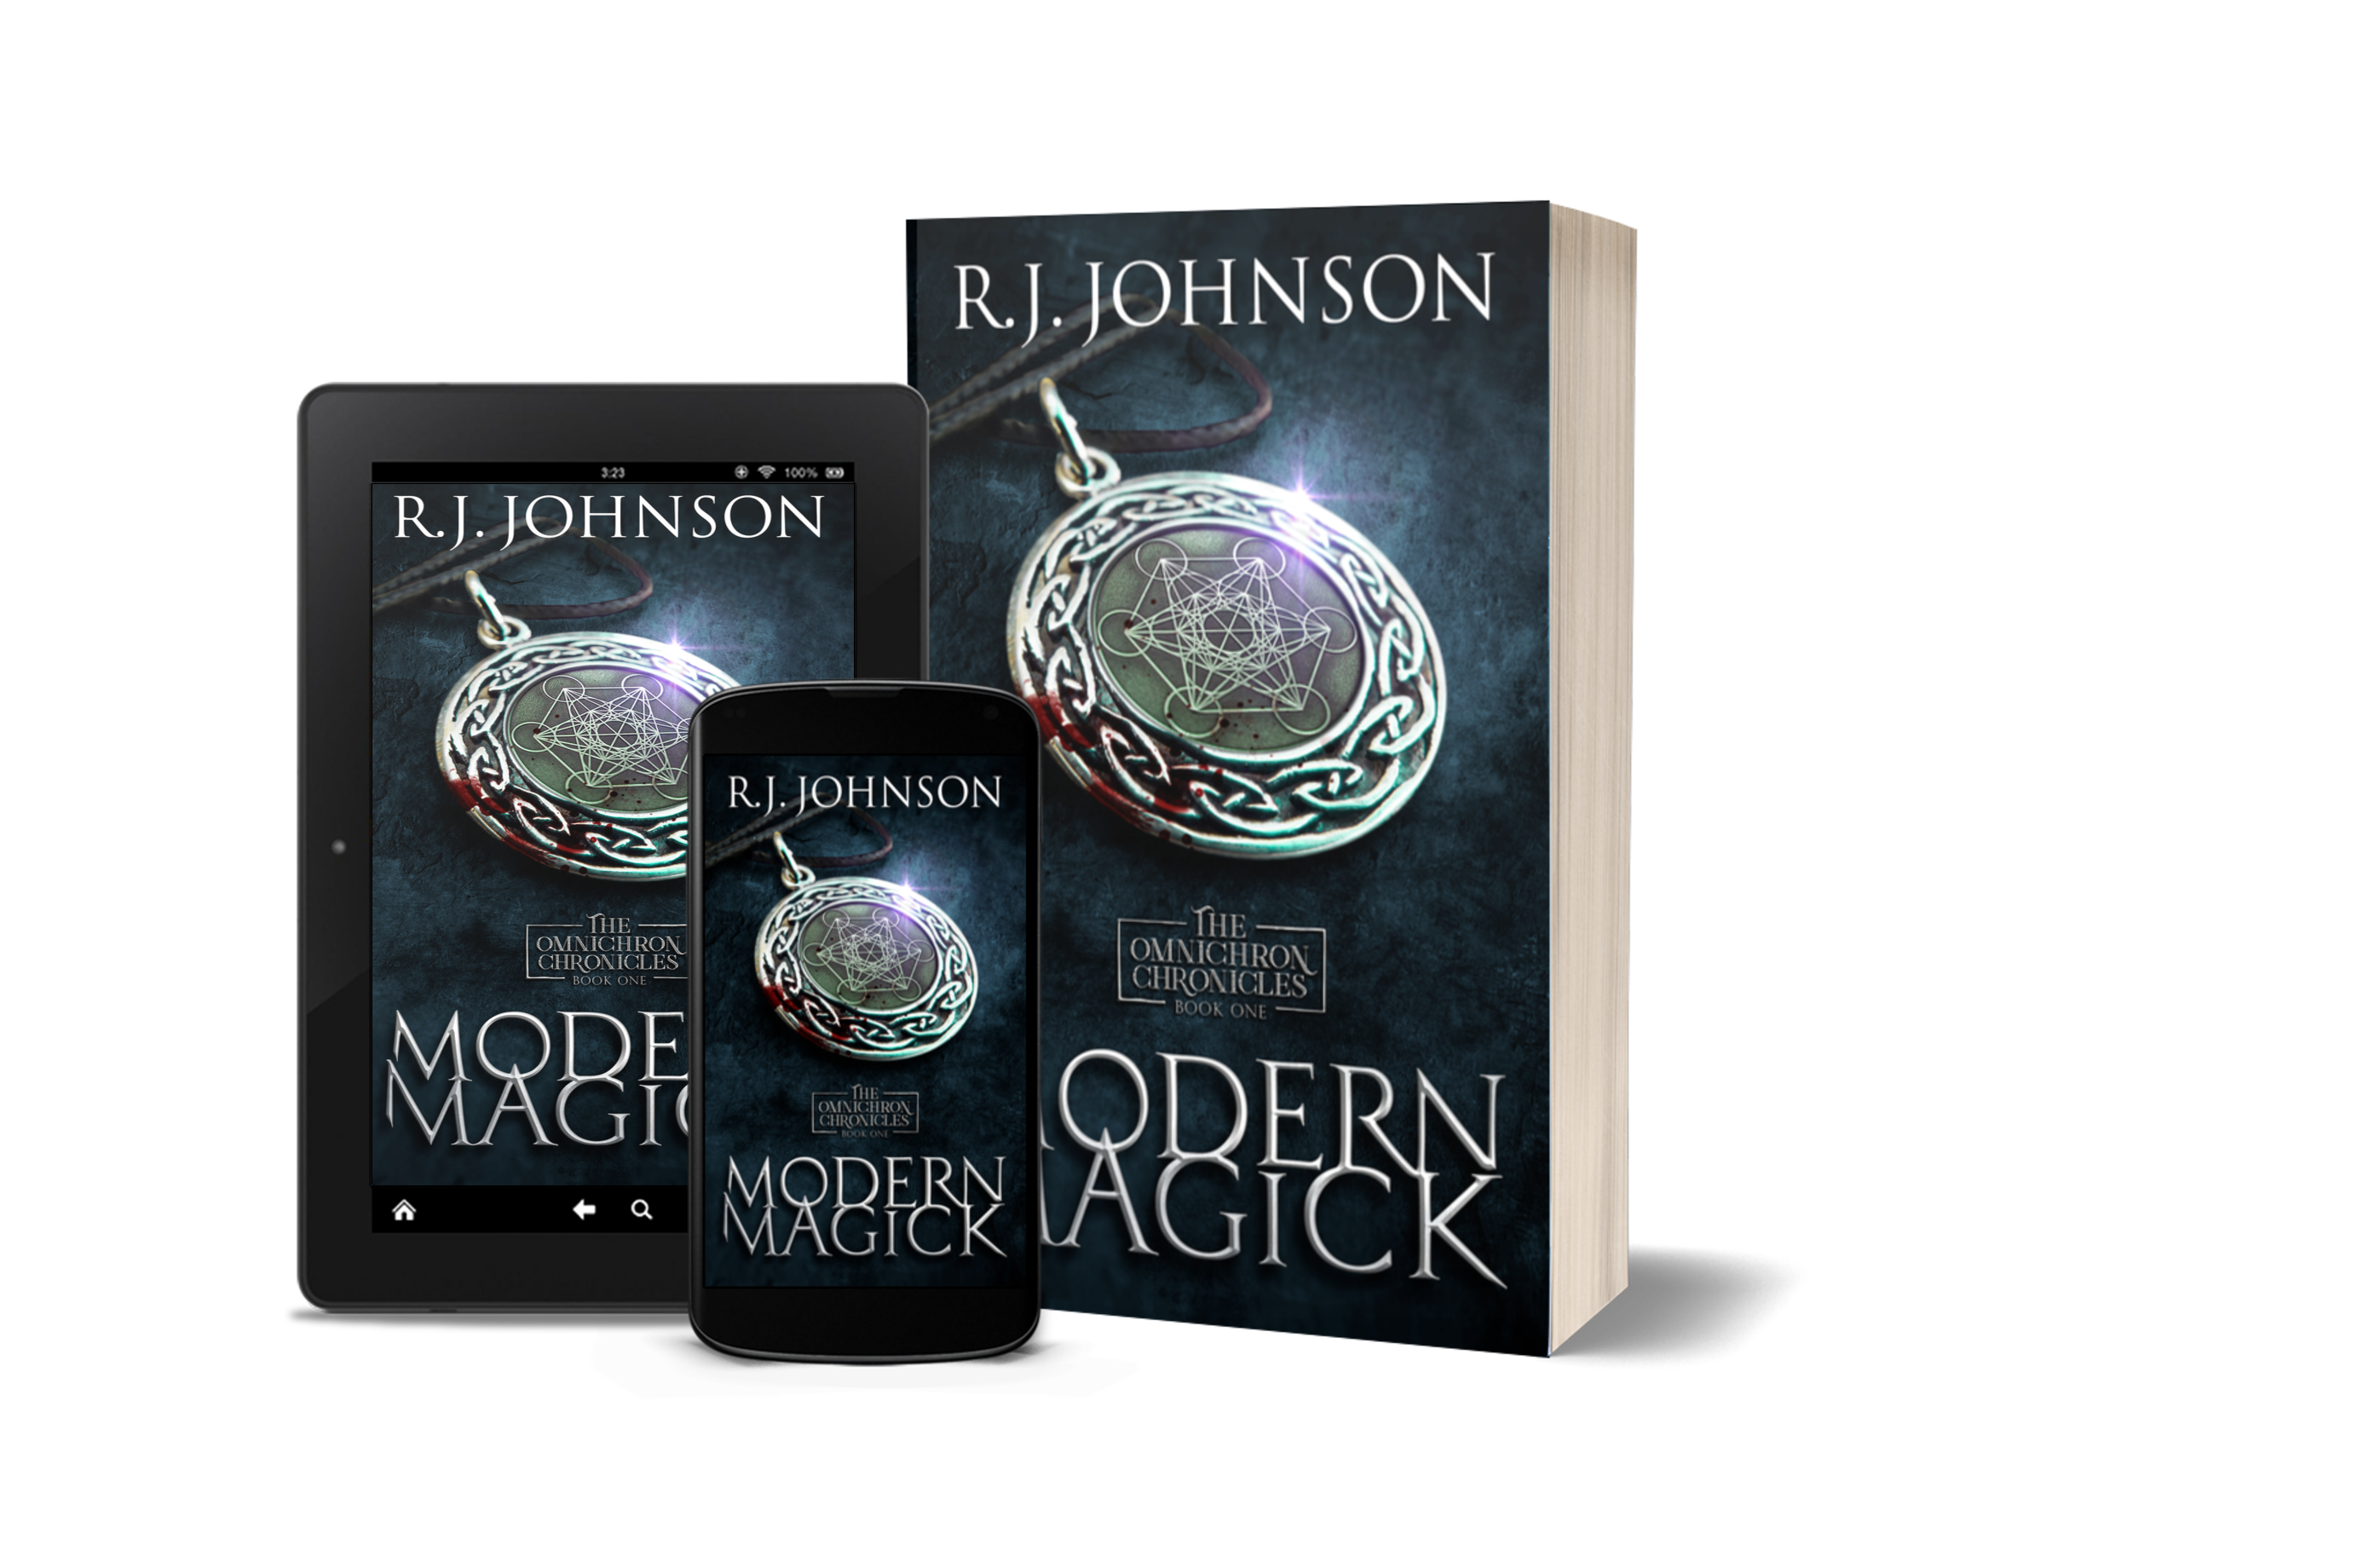 A photo of Modern Magick, a new book from RJ Johnson